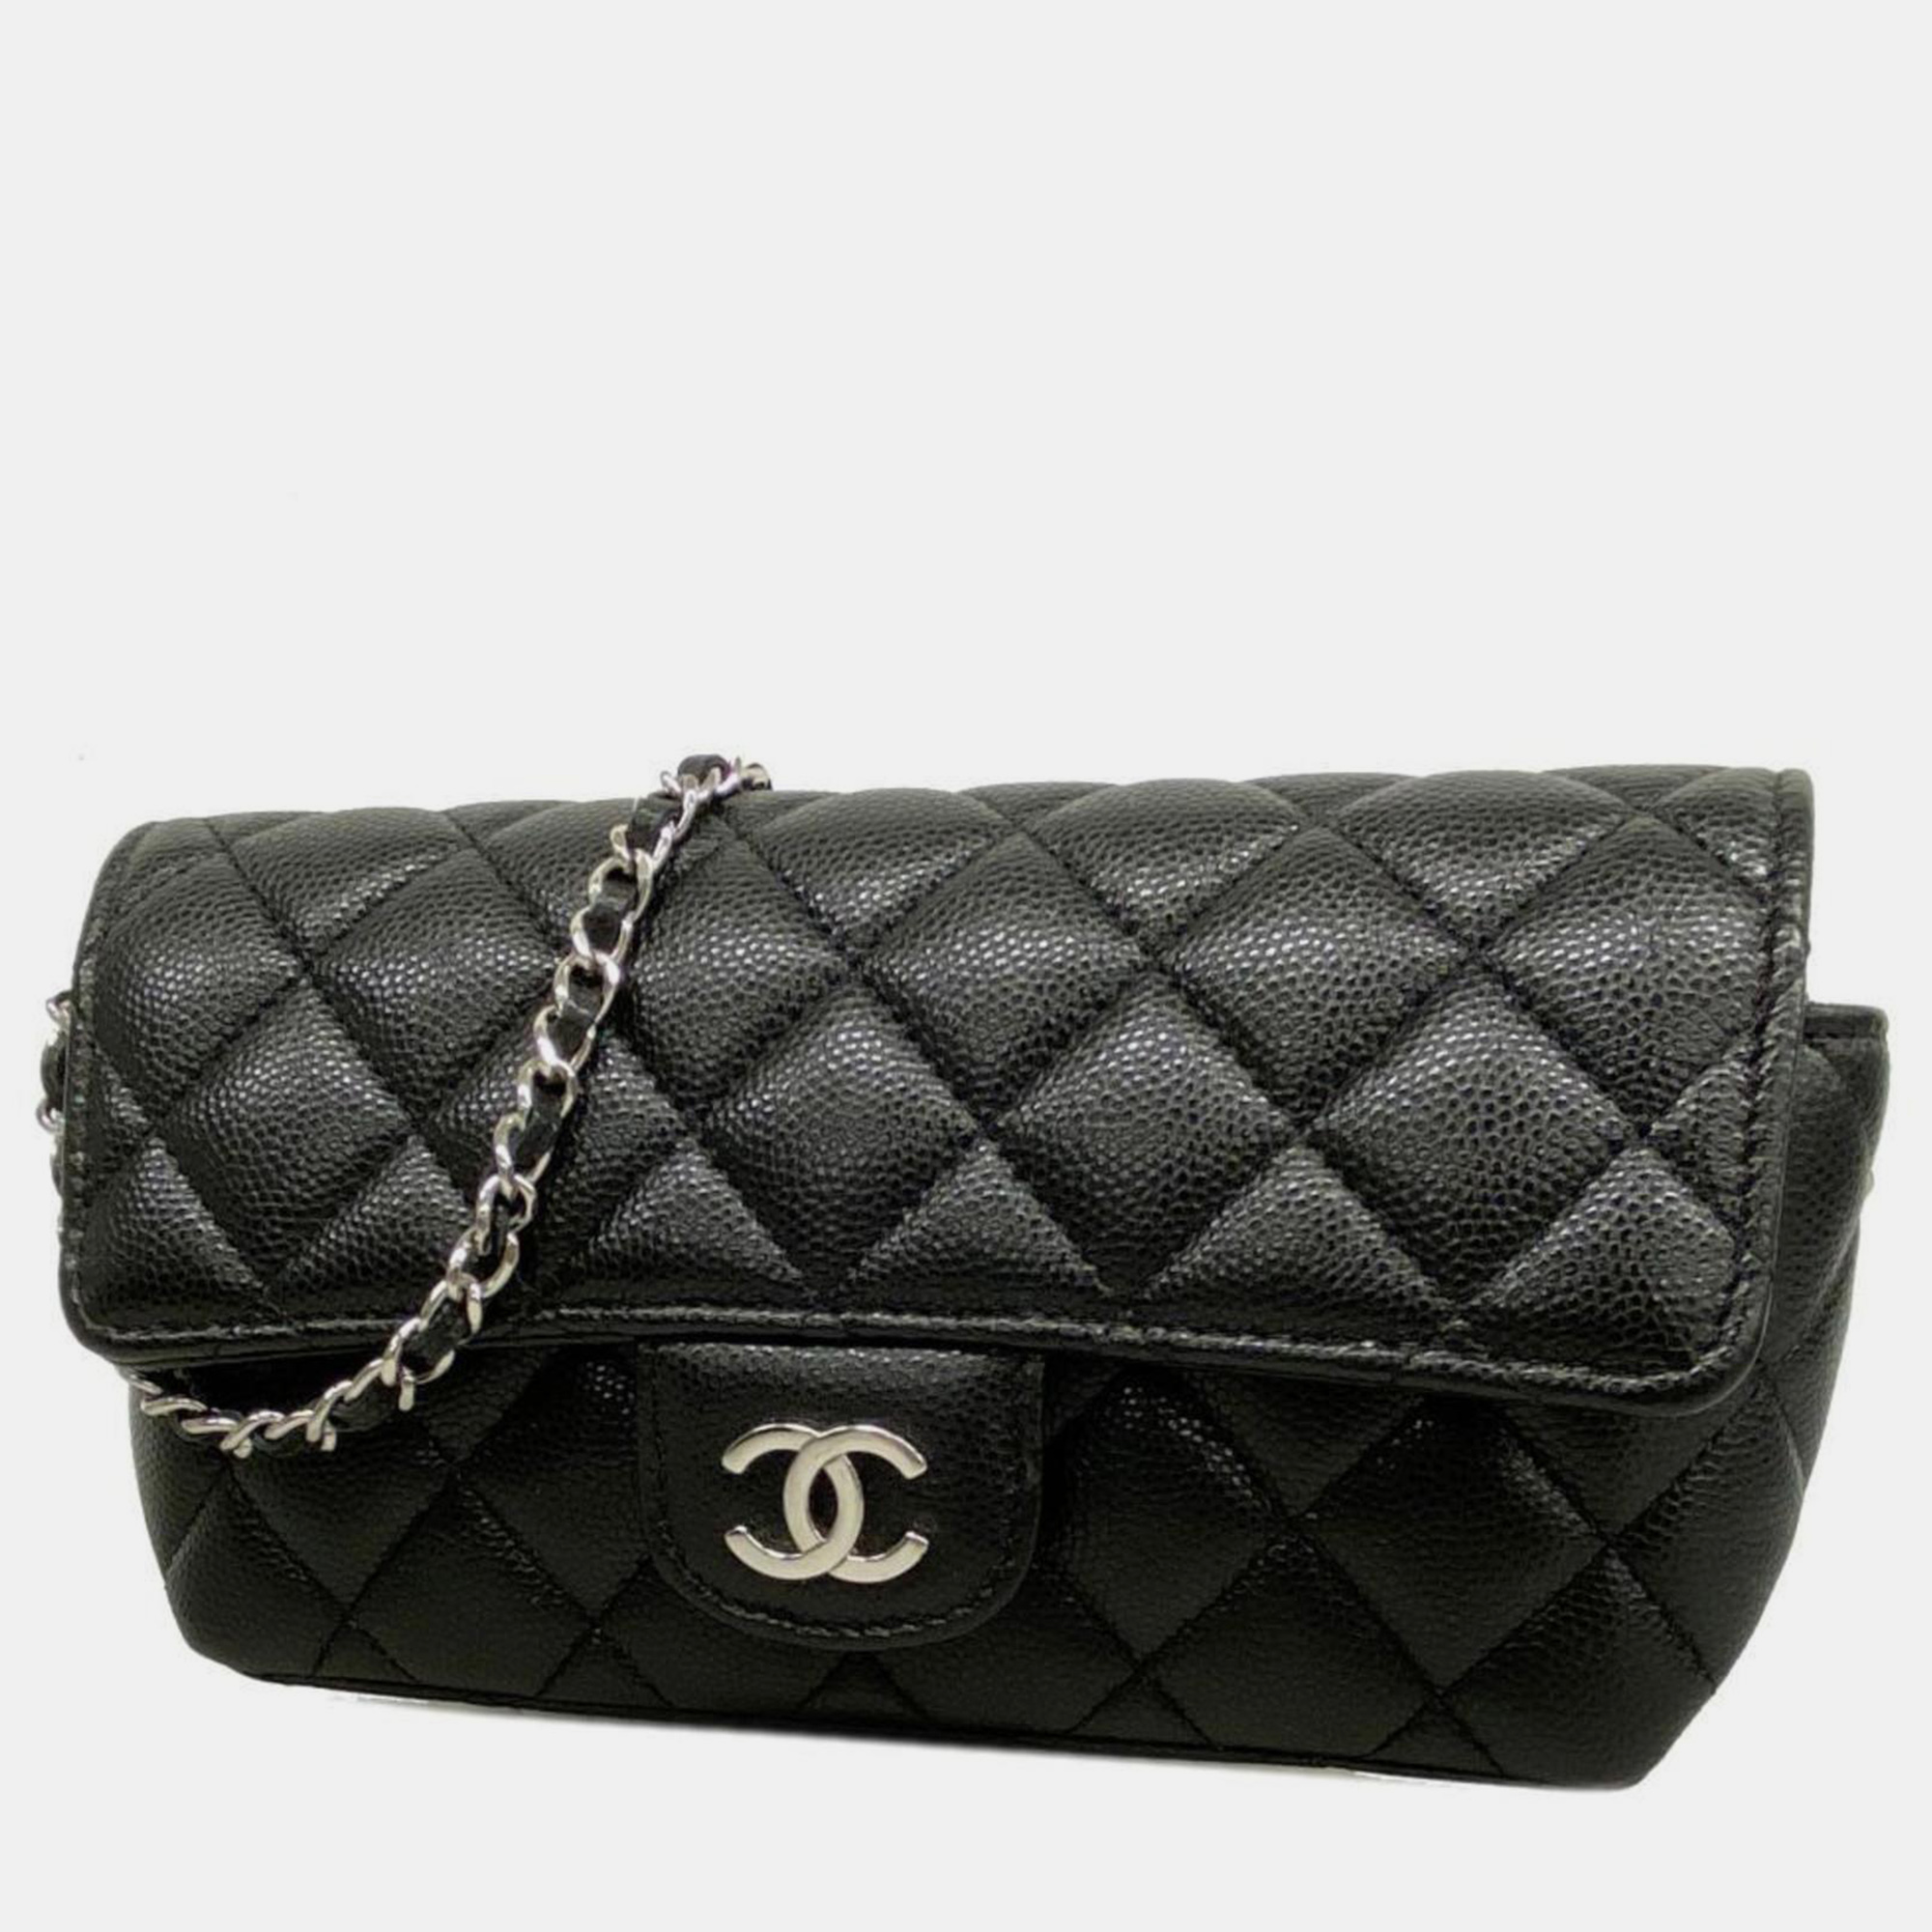 Chanel black quilted grained calfskin glasses case on chain